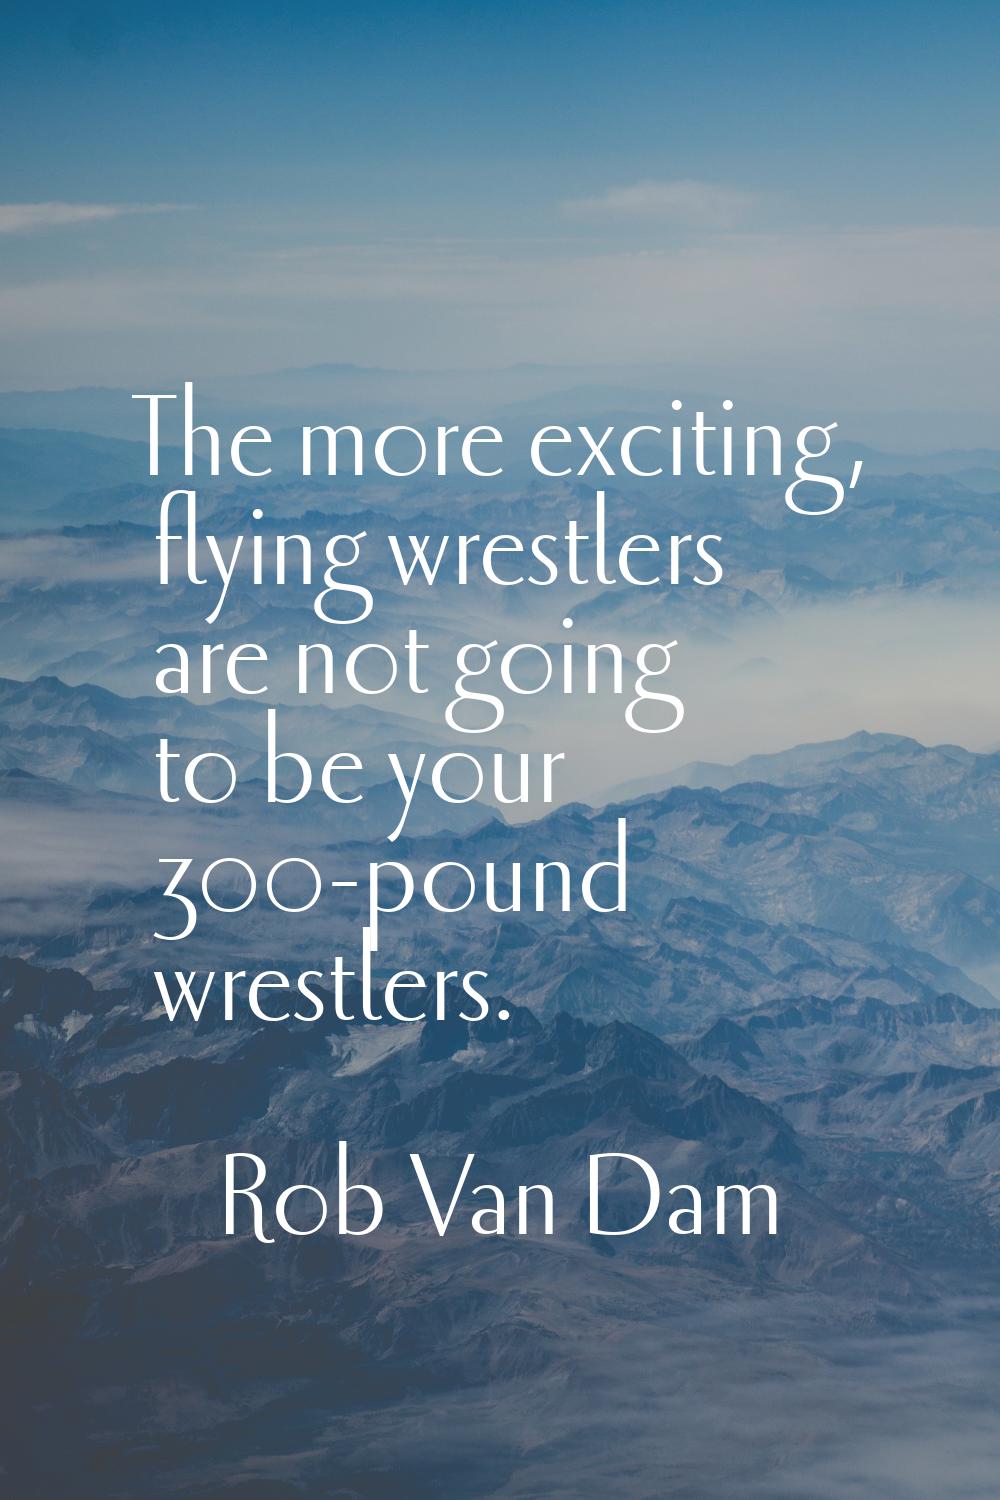 The more exciting, flying wrestlers are not going to be your 300-pound wrestlers.